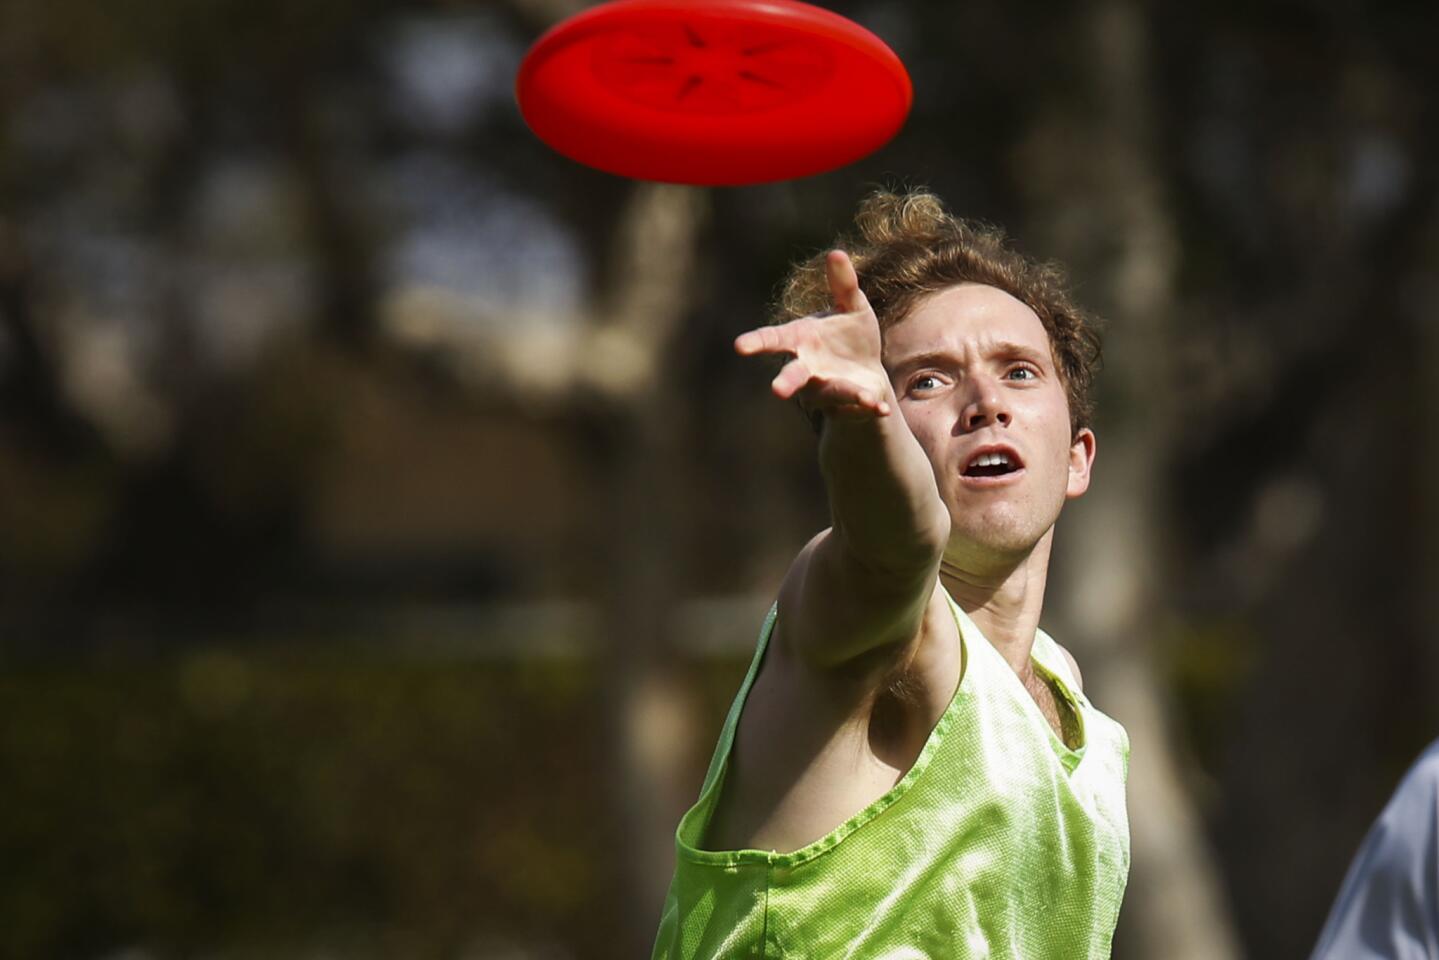 Cooper Bell passes during a weekly game of Ultimate at Point Dume Elementary School in Malibu on March 13.